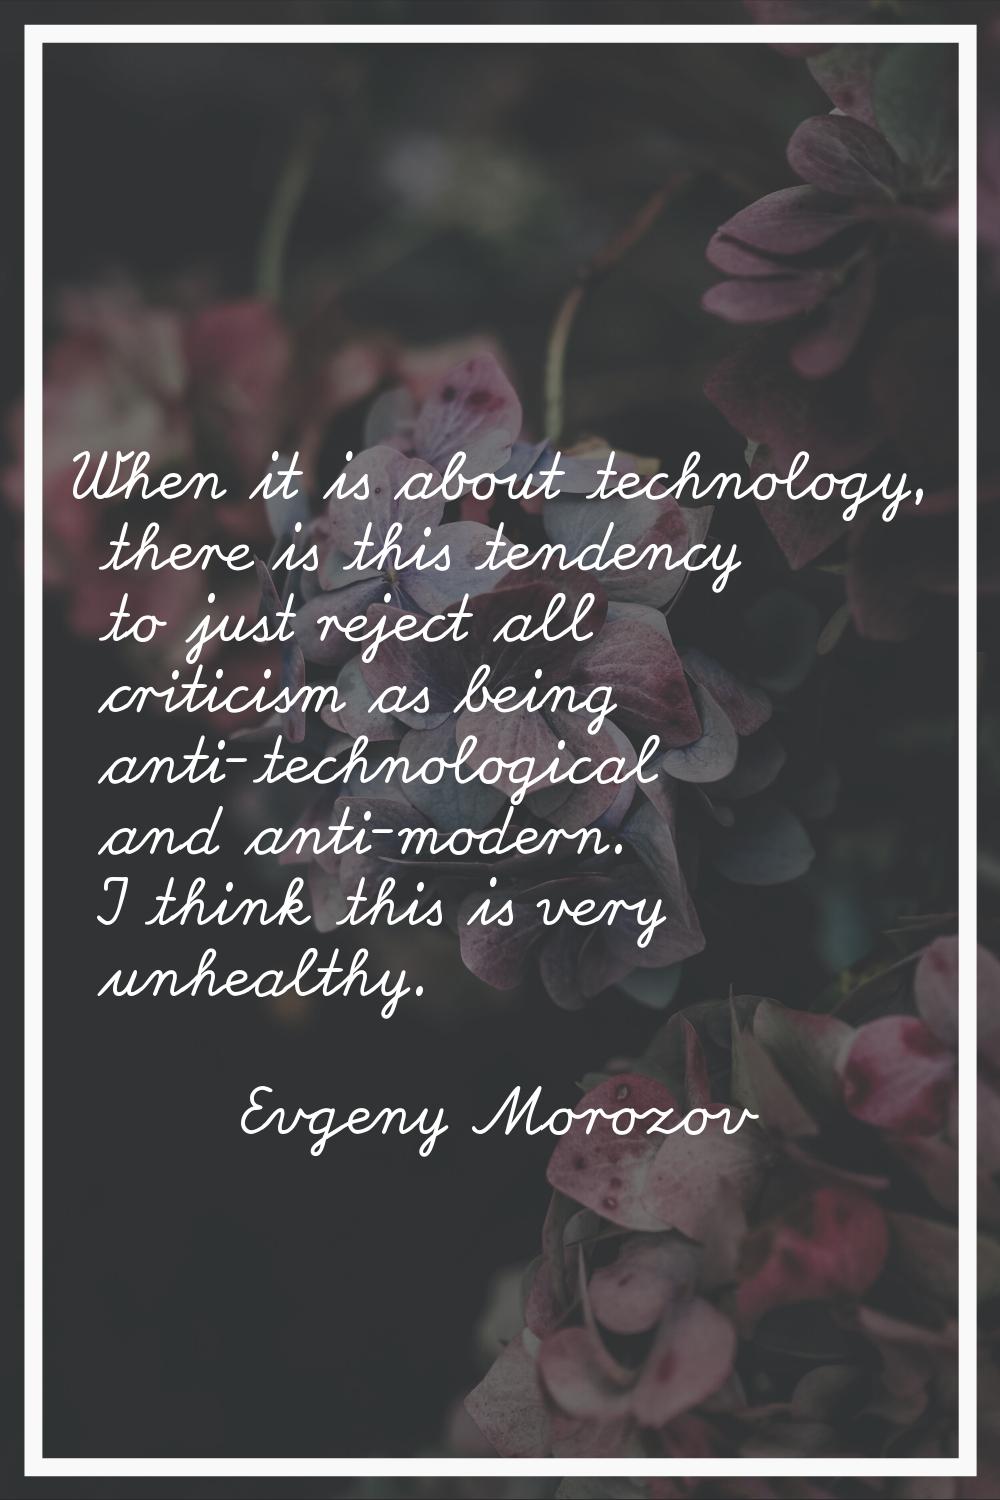 When it is about technology, there is this tendency to just reject all criticism as being anti-tech